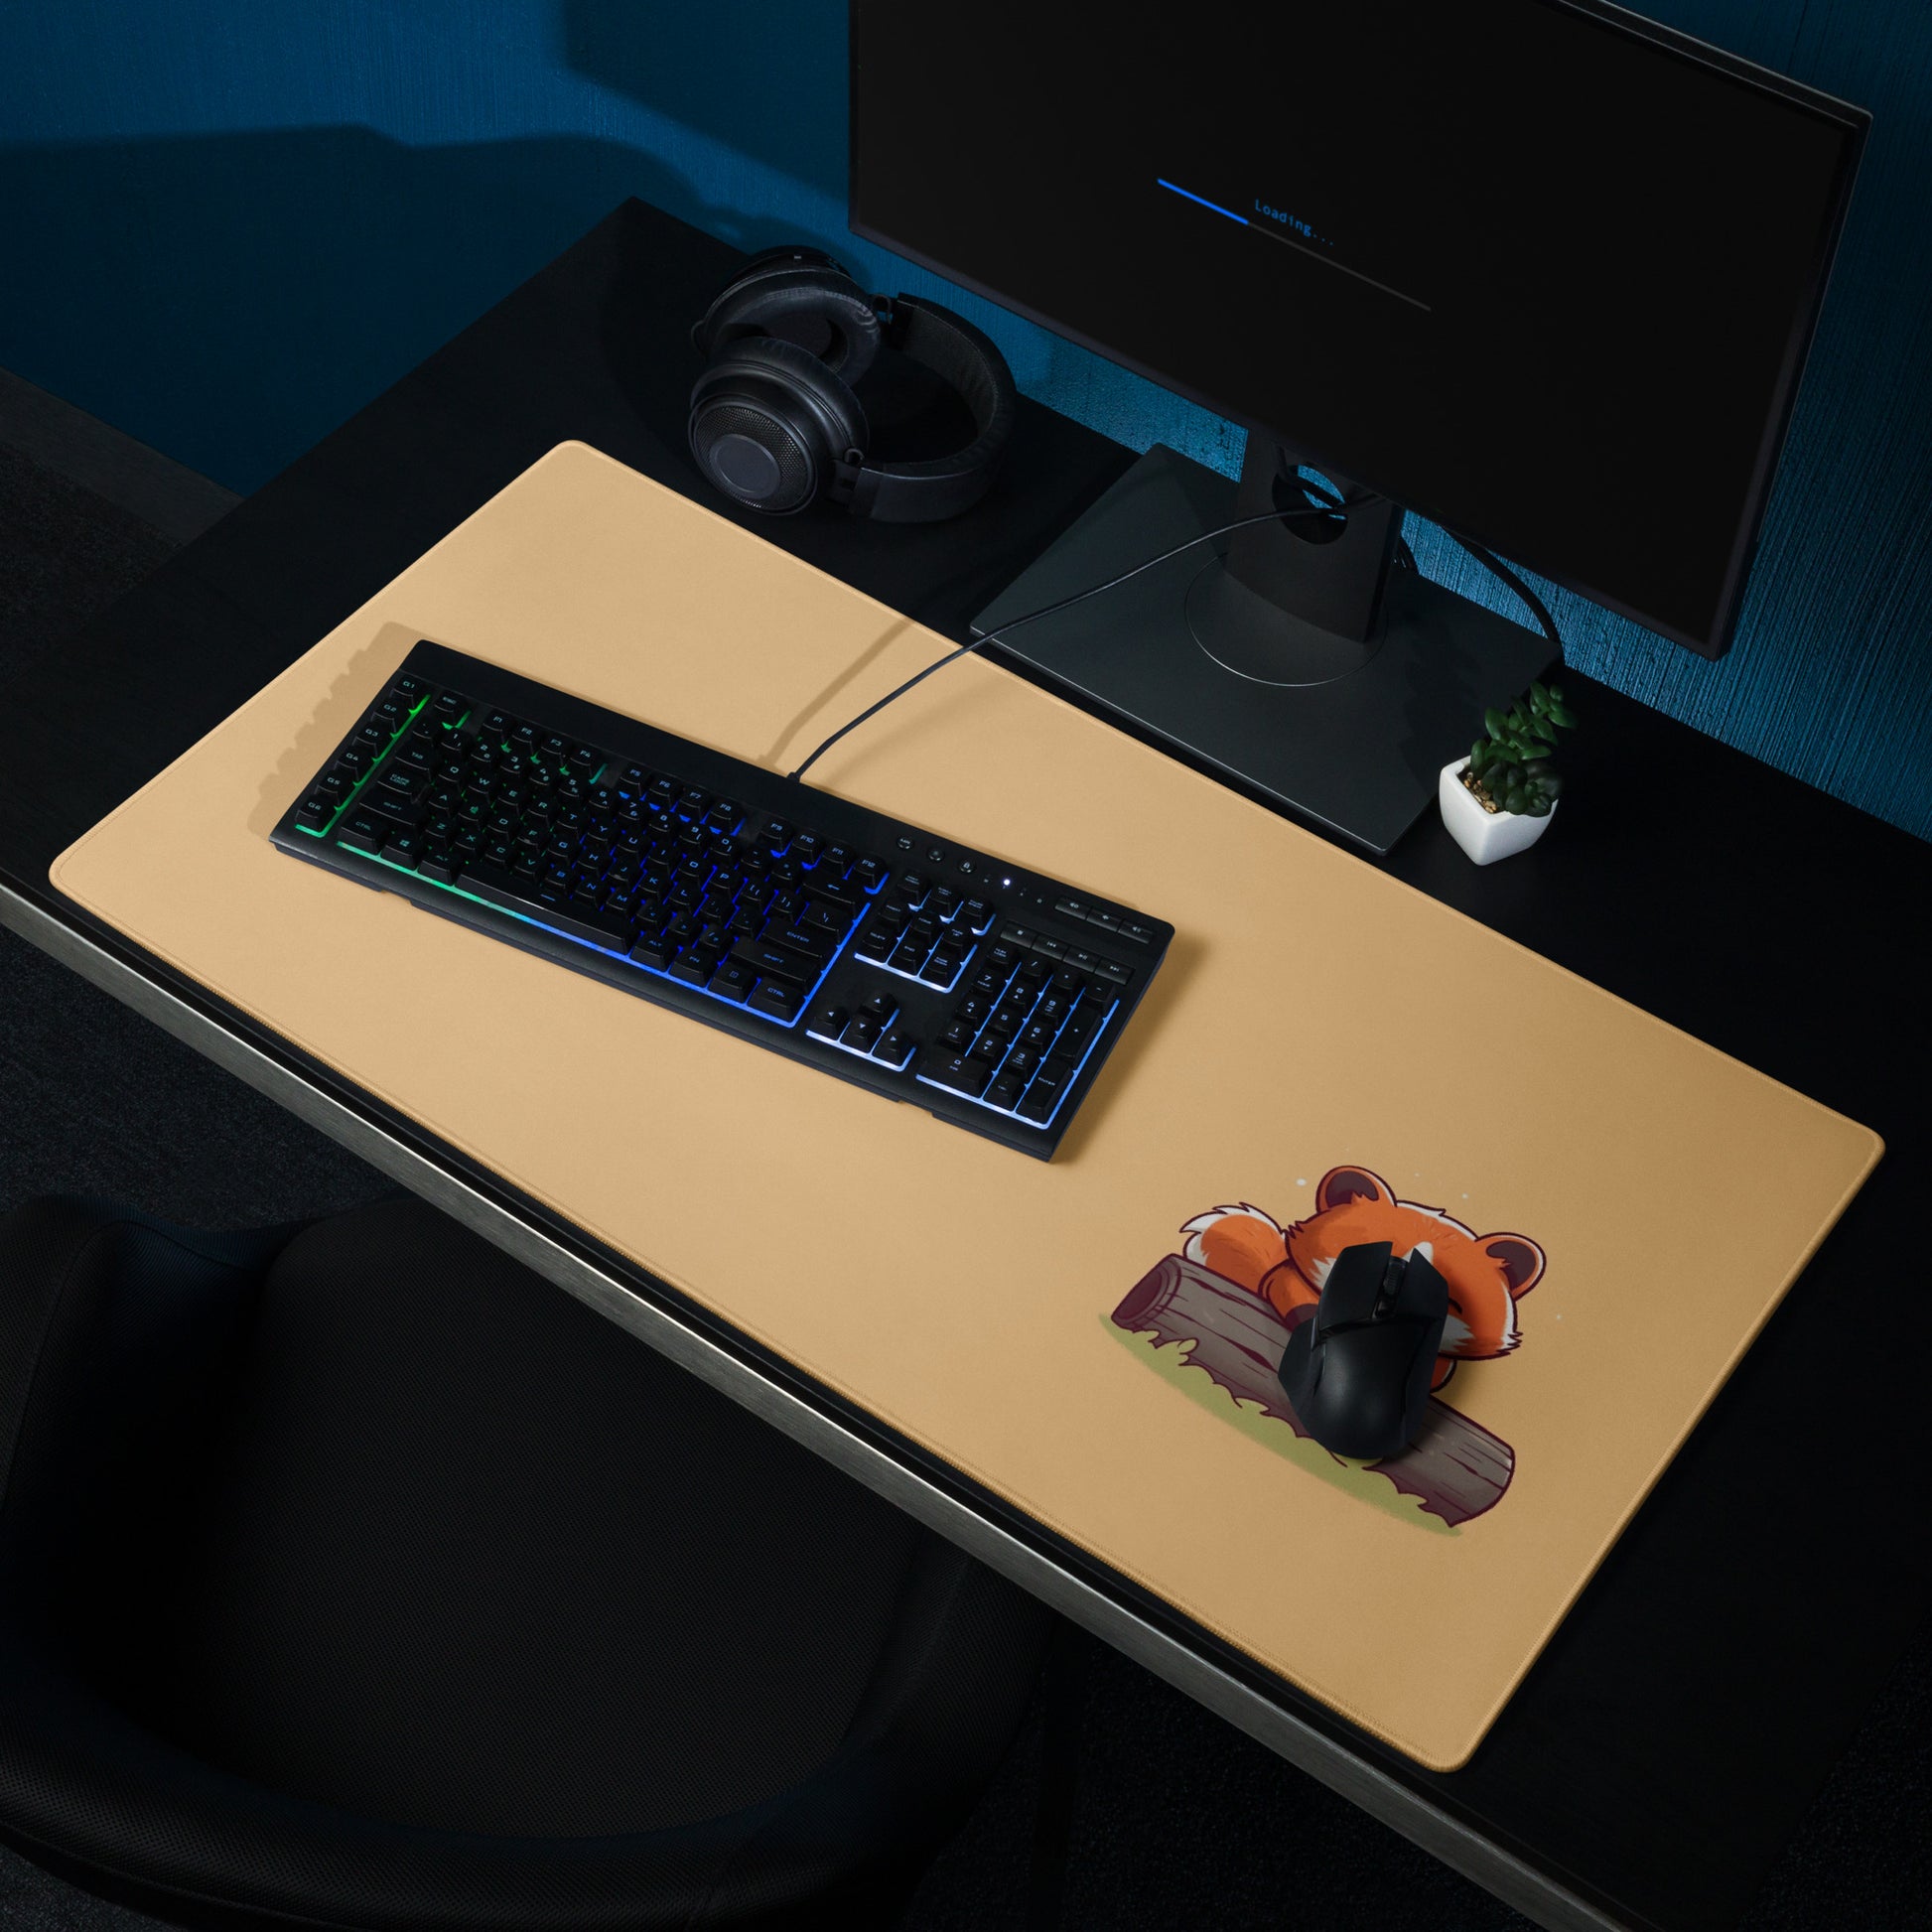 A gaming desk pad with a kawaii red panda smiling and leaning on a log. The background of the desk mat is orange. A keyboard and mouse sit on top of it.